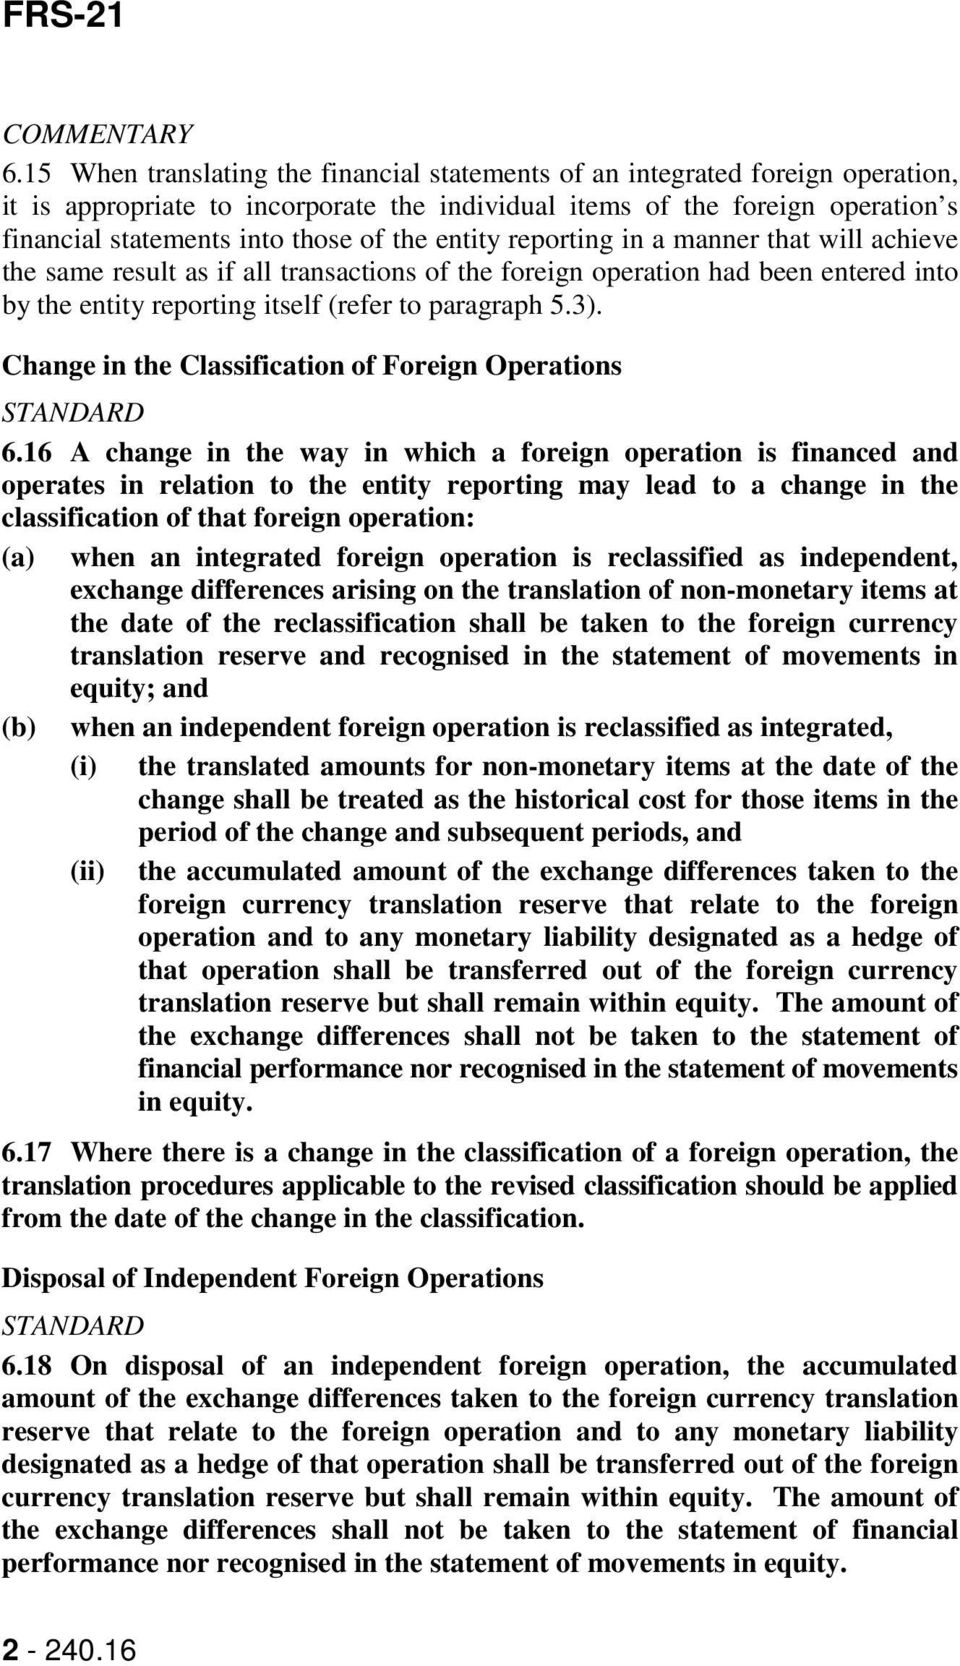 Change in the Classification of Foreign Operations 6.